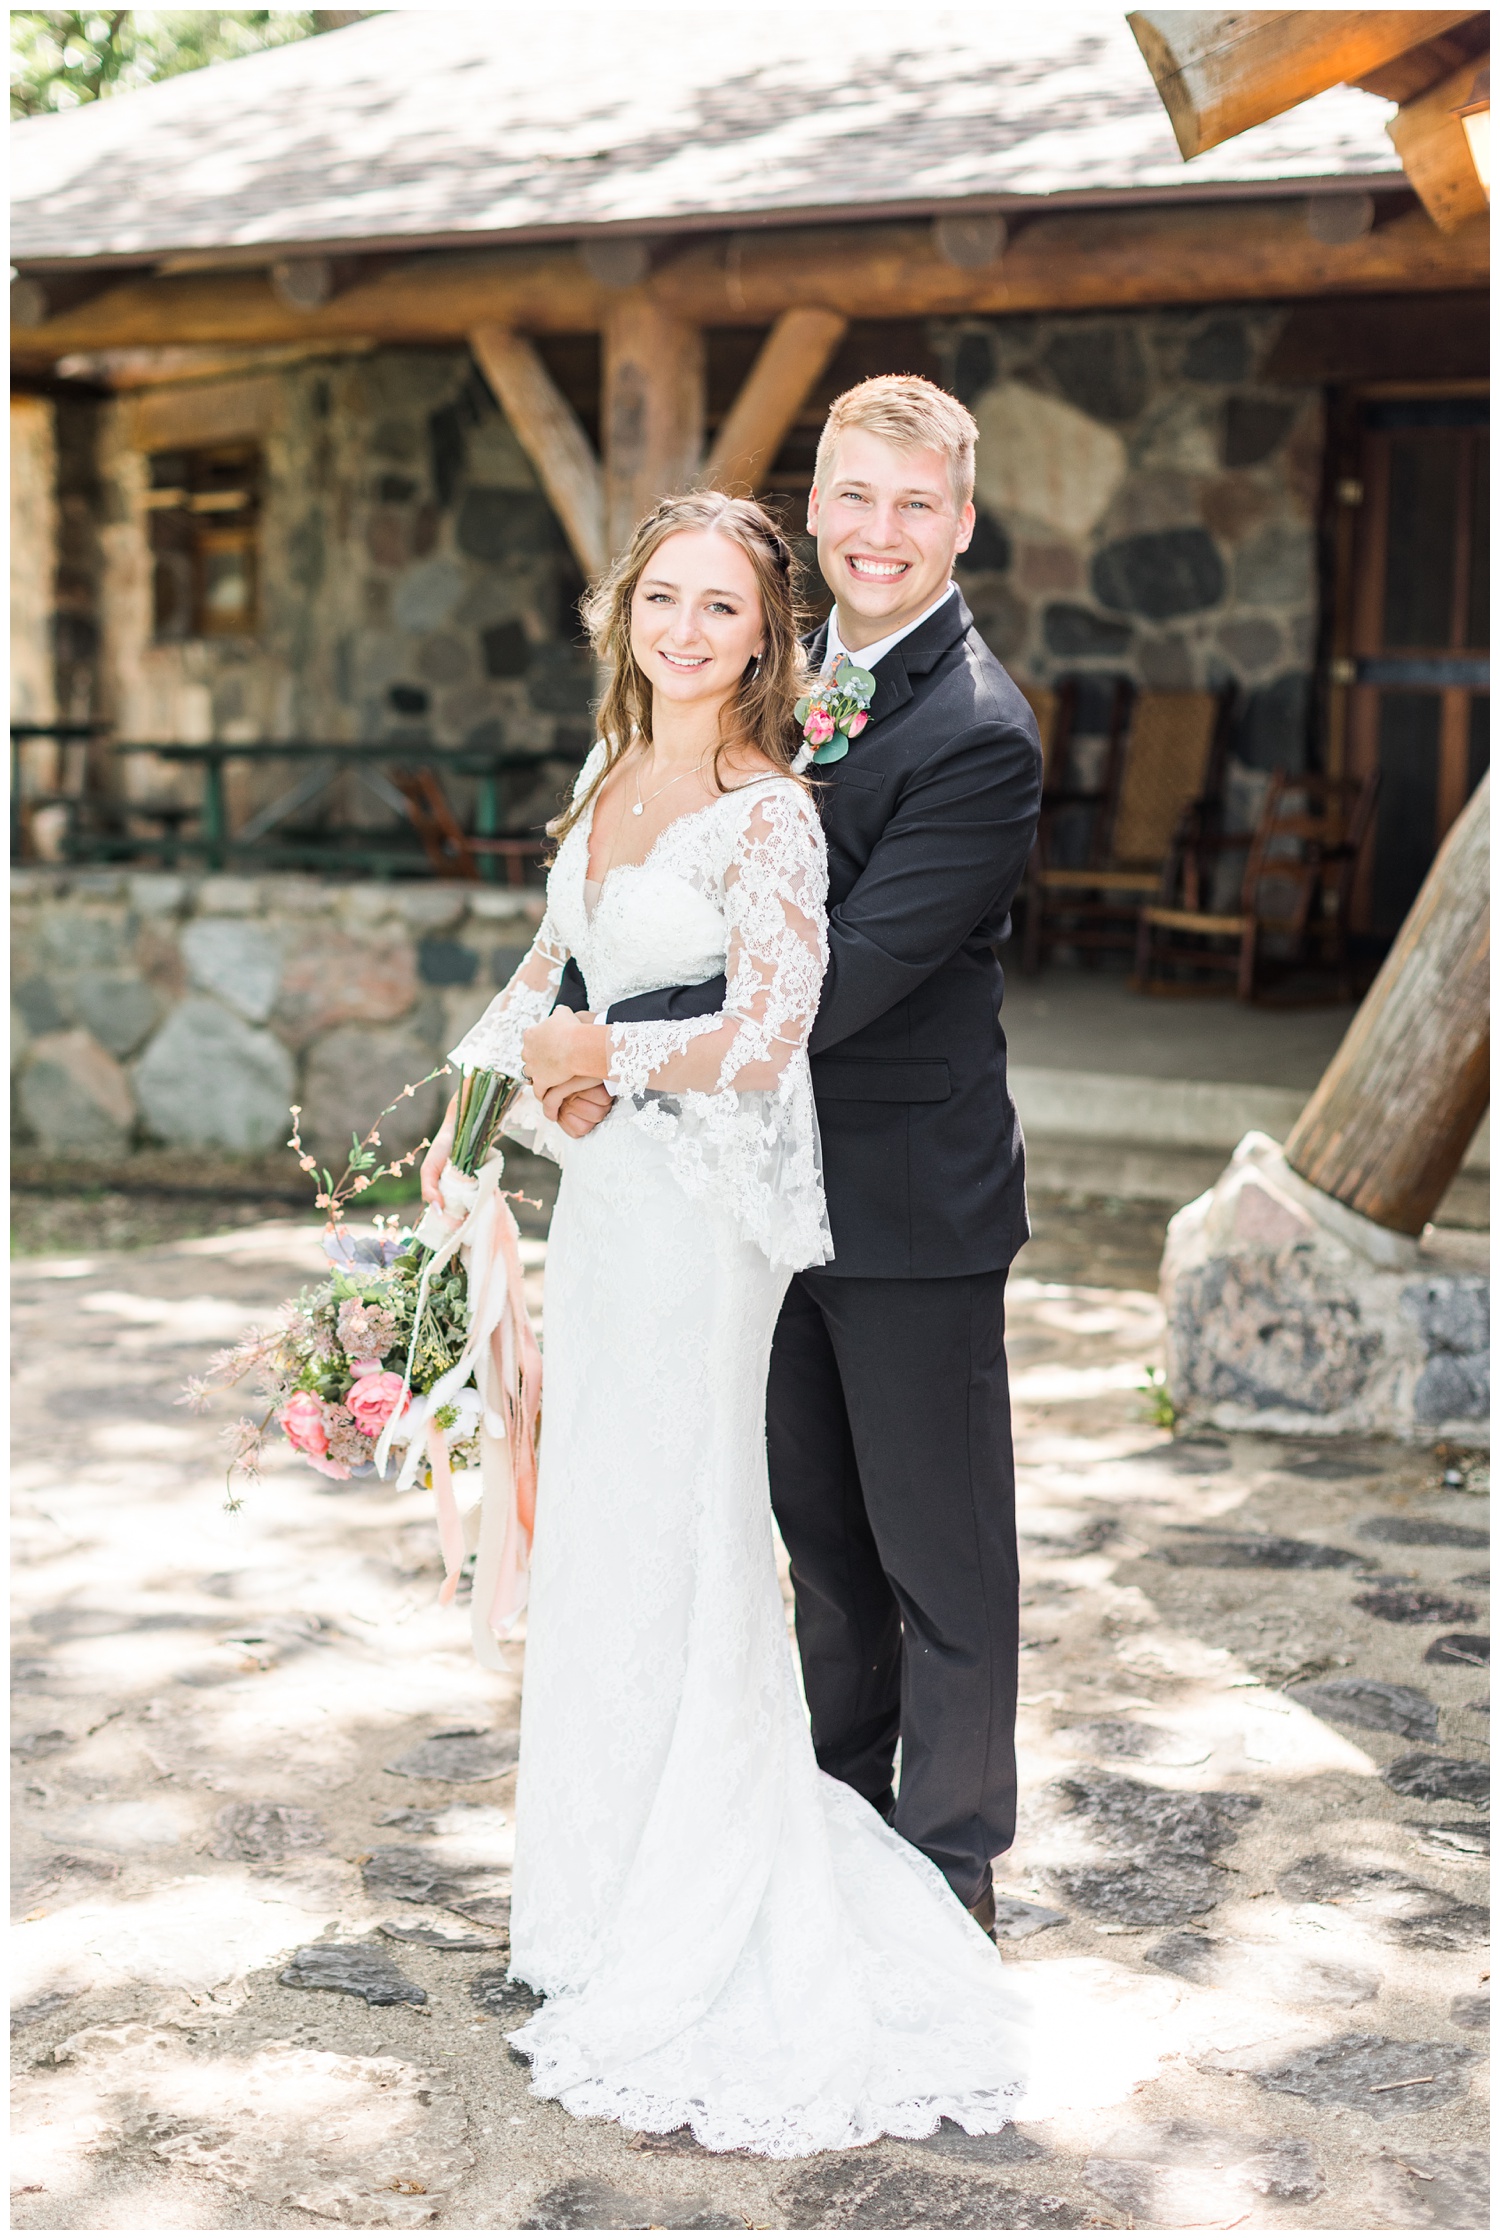 Ashlyn and Thad embrace in front of a rustic lodge on their wedding day | CB Studio